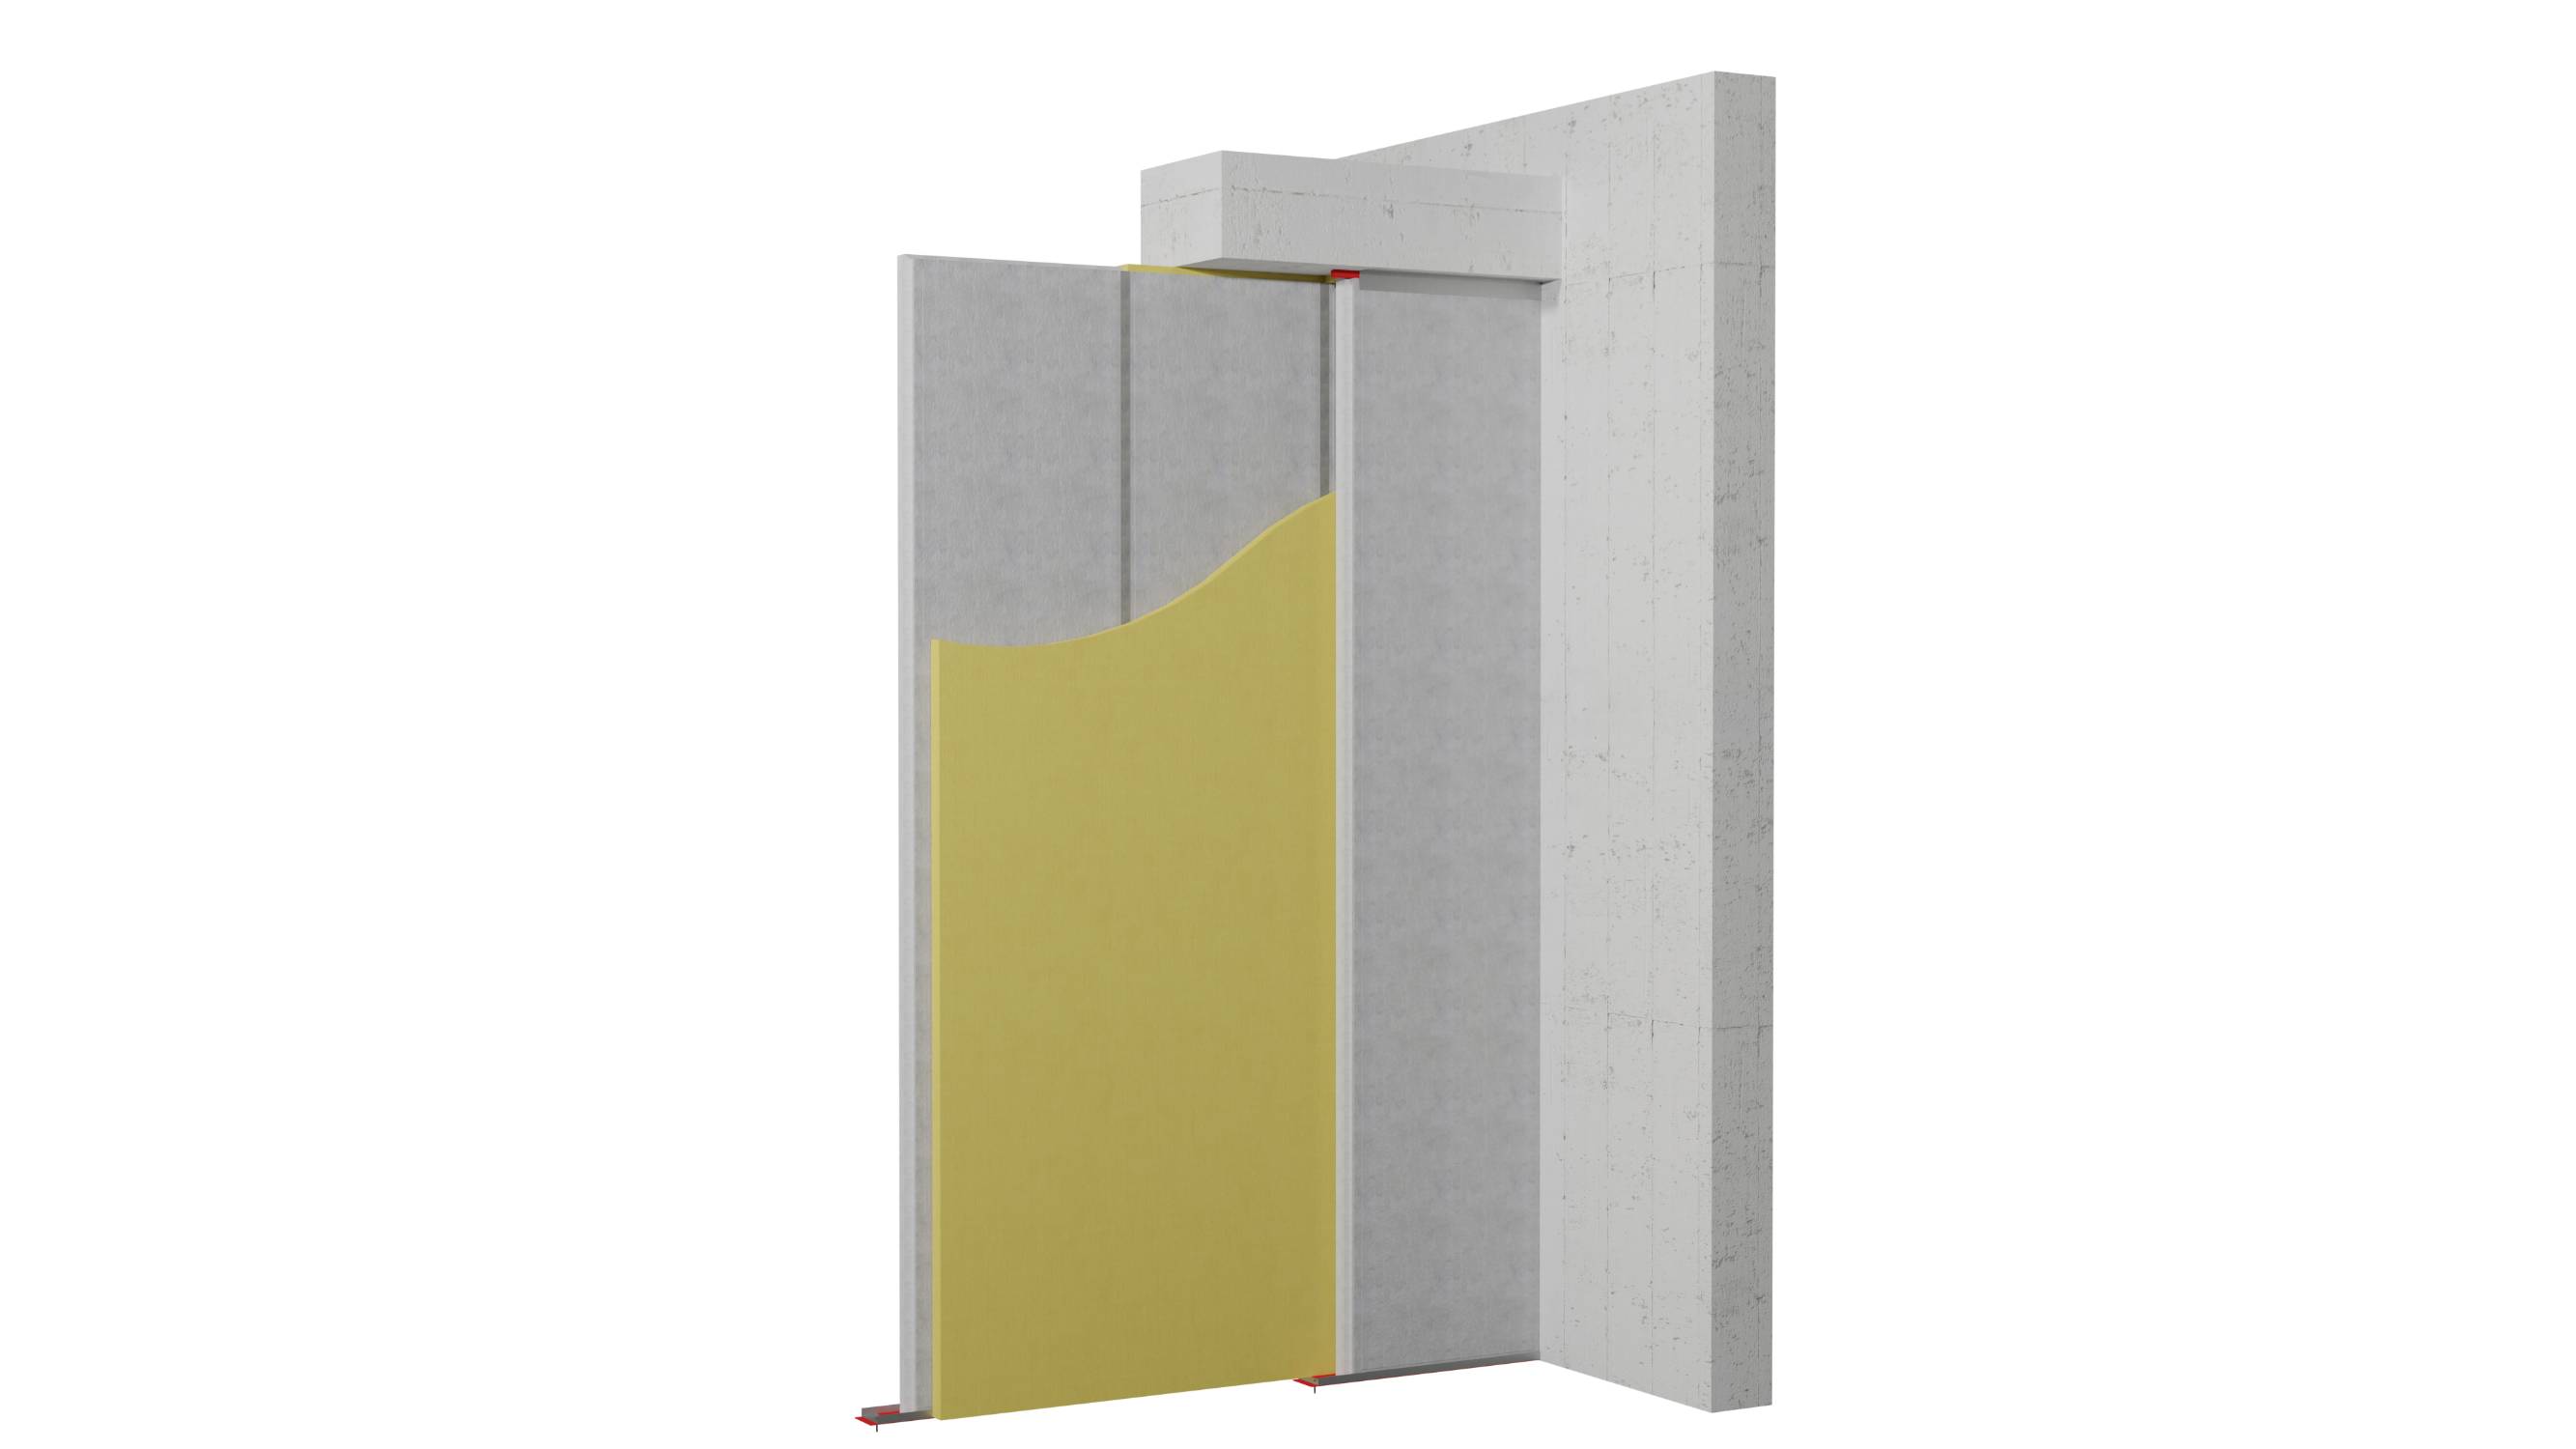 Twin 100mm Specwall (Strong, Durable, Mould resistant Masonry Fire partition walls) - Insulated Twin Concrete Panel